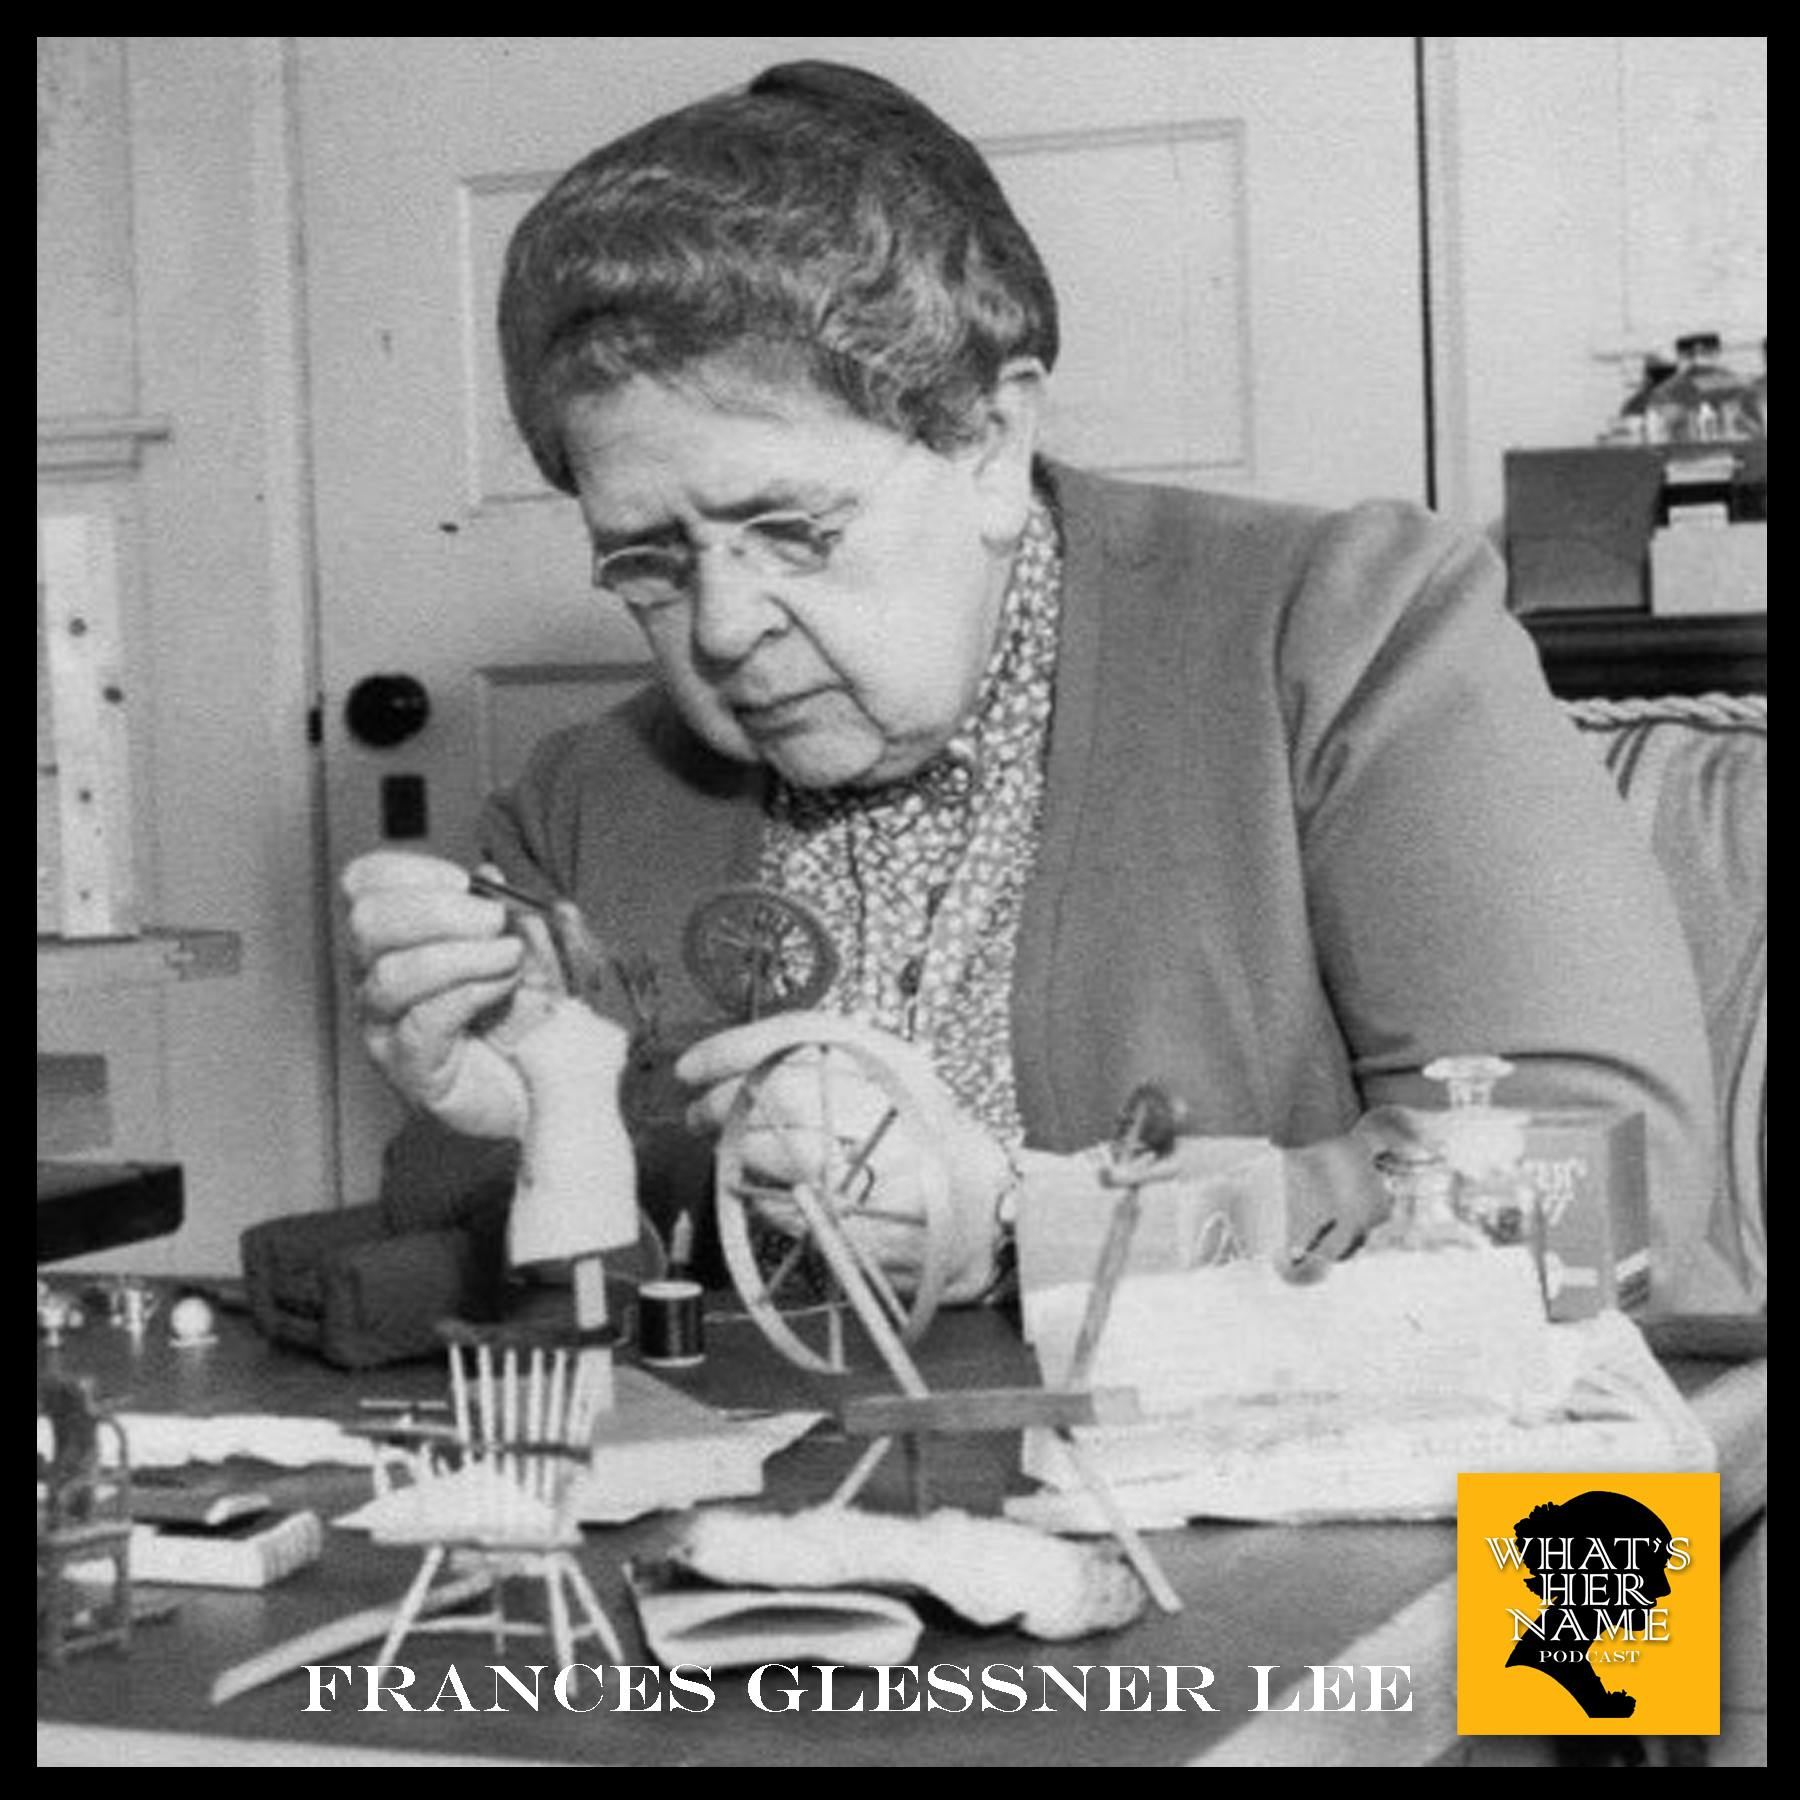 THE MOTHER OF FORENSIC SCIENCE Frances Glessner Lee